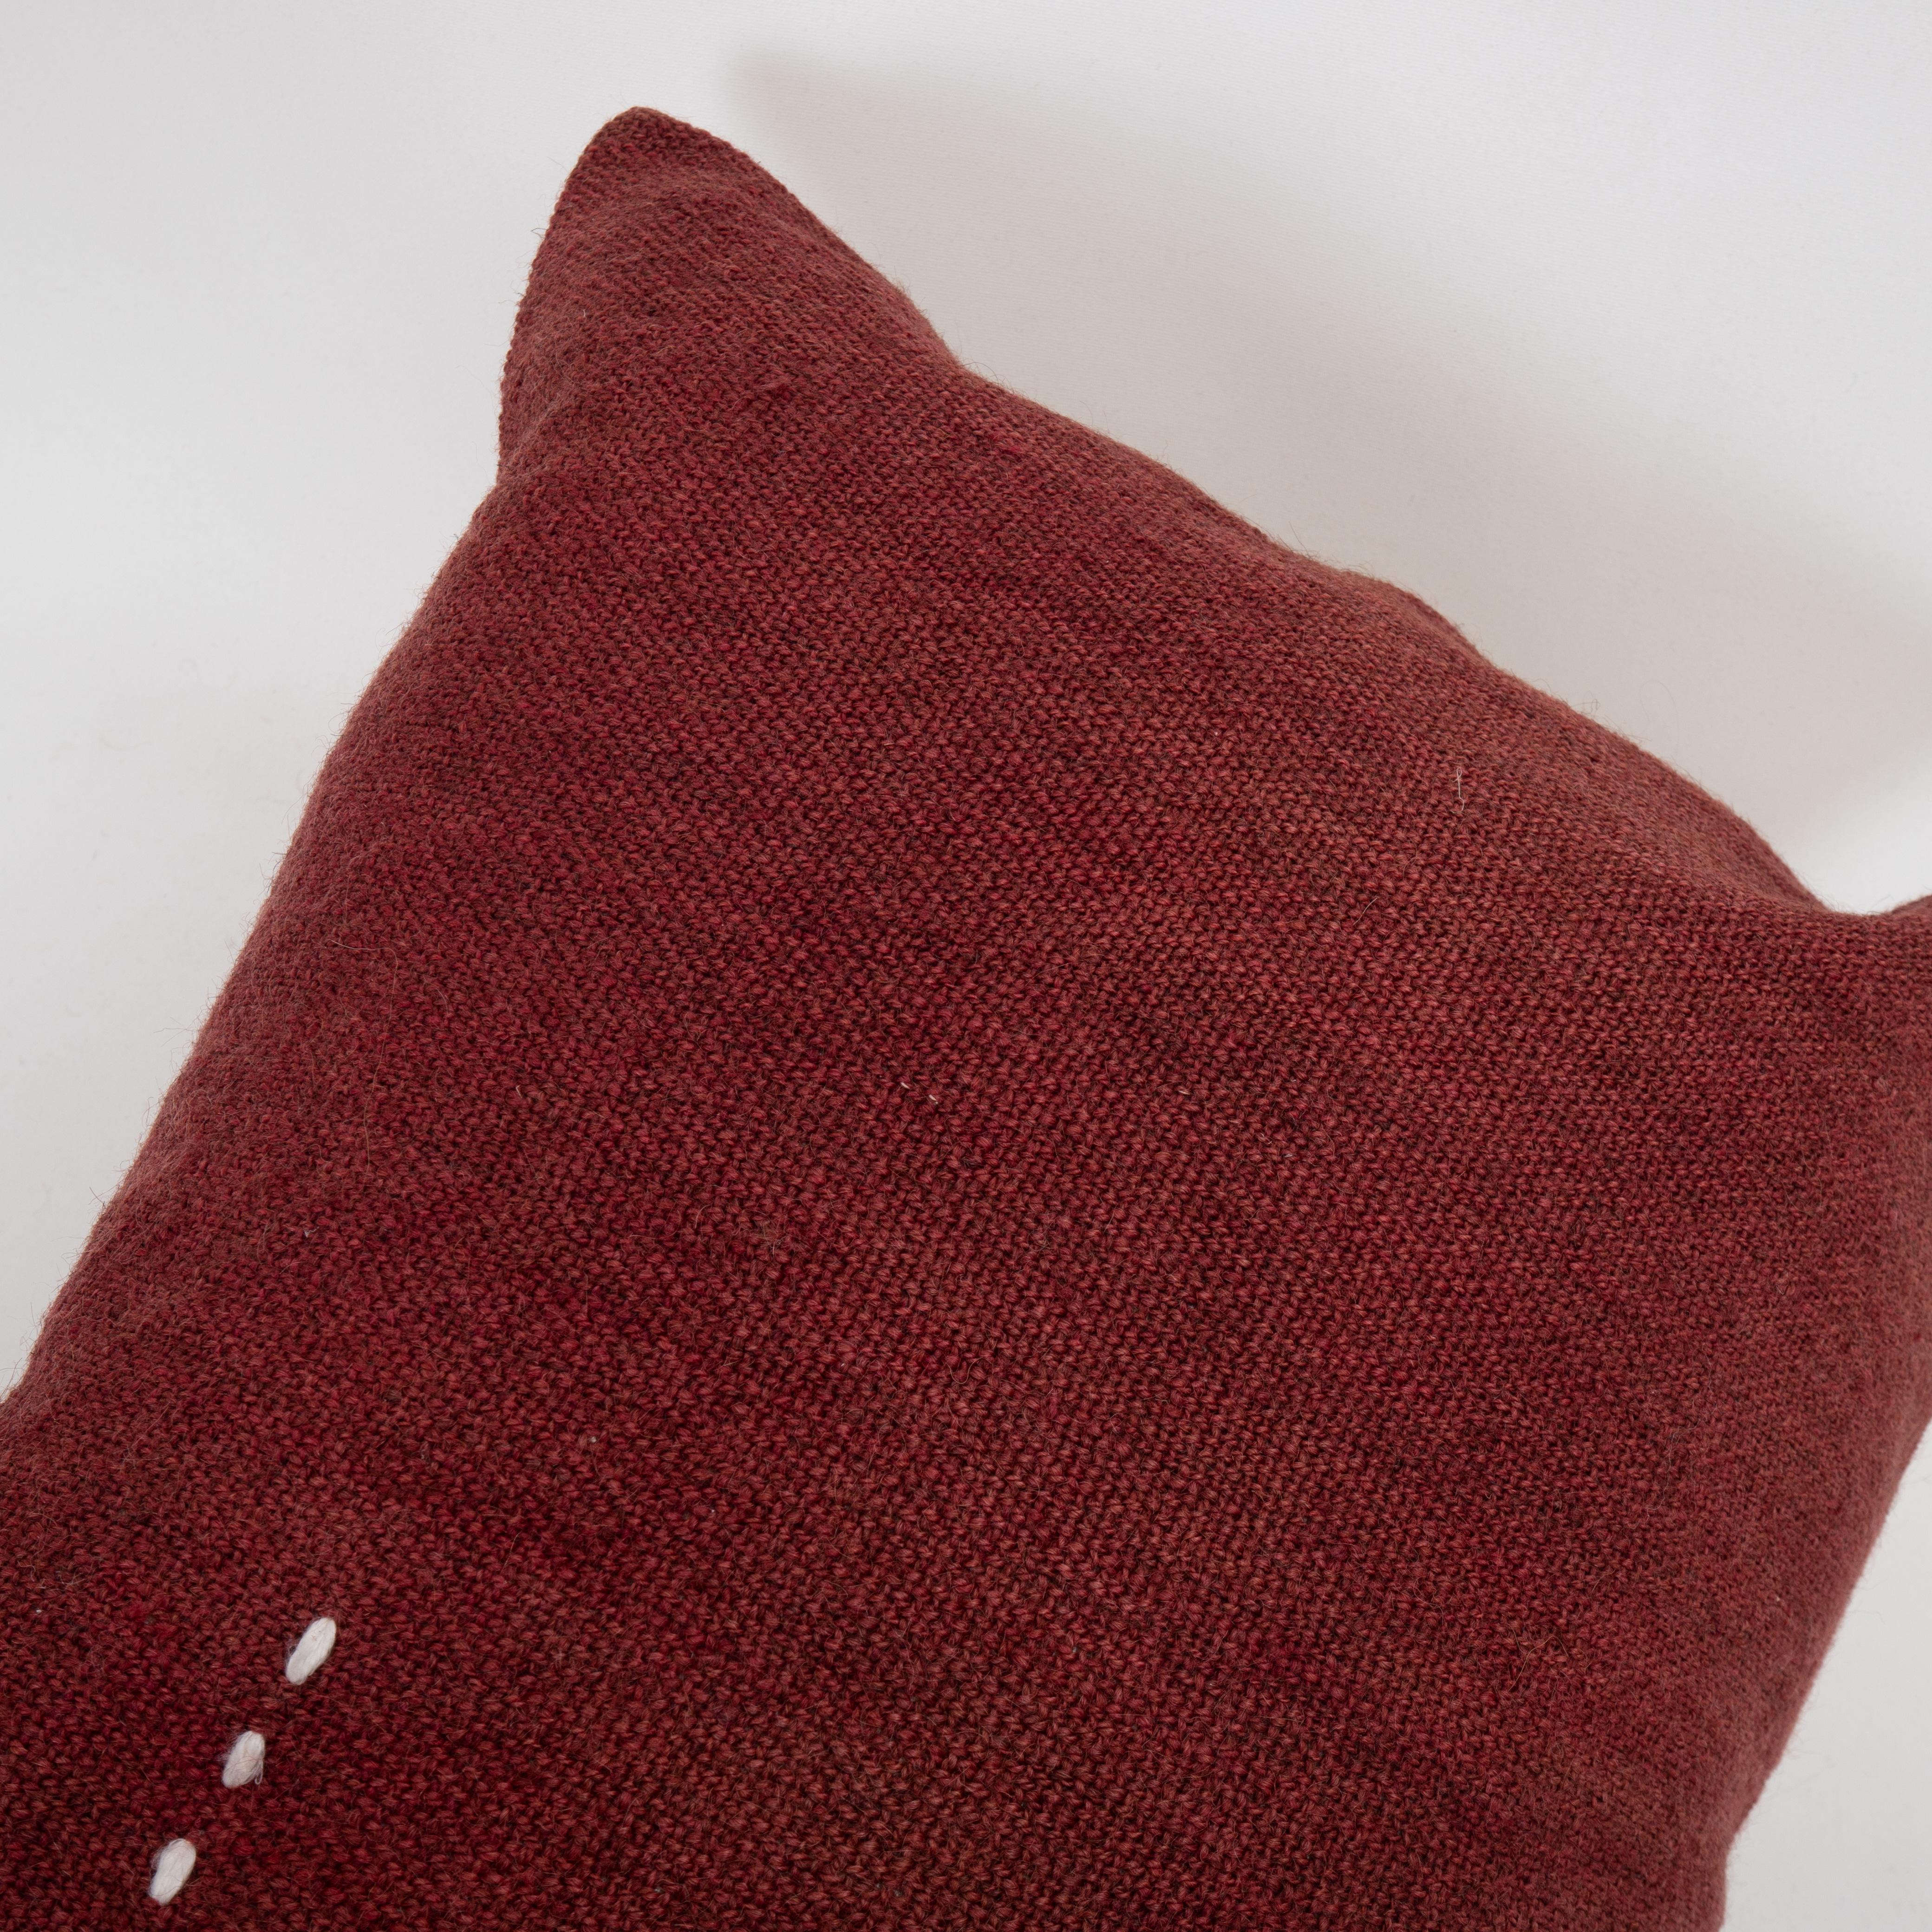 Hand-Woven Pillowcase Made from an Eastern Anatolian Perde ‘ Cover’, Mid 20th C For Sale